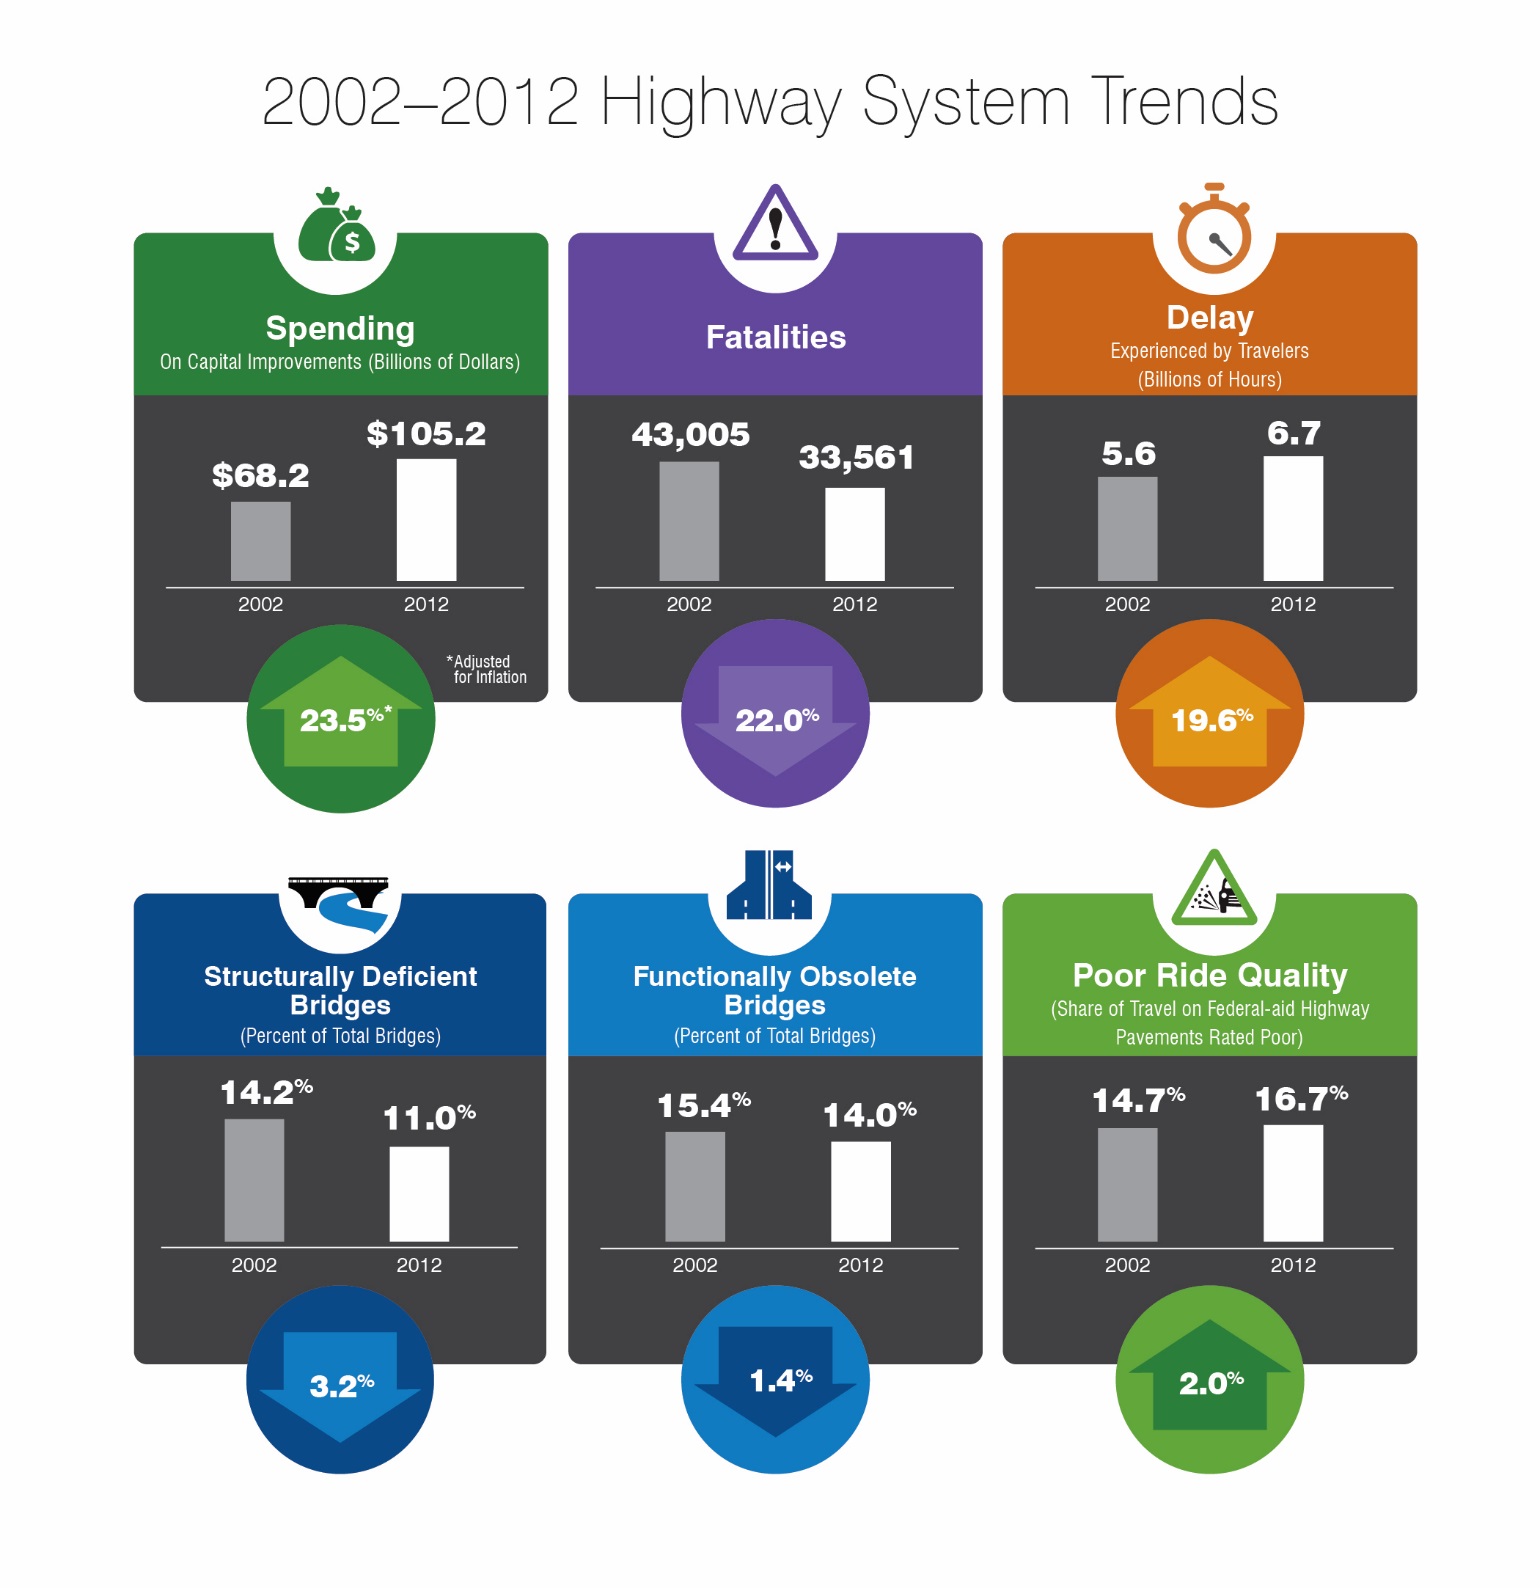 This exhibit illustrates Highway System trends in 2002-2012 for spending, fatalities, delay, structurally deficient bridges, functionally obsolete bridges, and poor ride quality. Highway capital expenditures increased from $68.2 billion in 2002 to $105.2 billion in 2012, a 23.5-percent increase after adjusting for inflation. The annual number of highway fatalities was reduced by 22.0 percent from 2002 to 2012, dropping from 43,005 to 33,561. Total delay experienced by all travelers combined rose from 5.6 billion hours in 2002 to 6.7 billion hours in 2012, a 19.6-percent increase. The share of bridges classified as structurally deficient improved, dropping 3.2 percent from 14.2 percent in 2002 to 11.0 percent in 2012. The share of bridges classified as functionally obsolete declined by 1.4 percent from 15.4 percent in 2002 to 14.0 percent in 2012. The share of Federal-aid highway pavements with poor ride quality rose 2.0 percent from 2002 to 2012, rising from 14.7 percent to 16.7 percent .